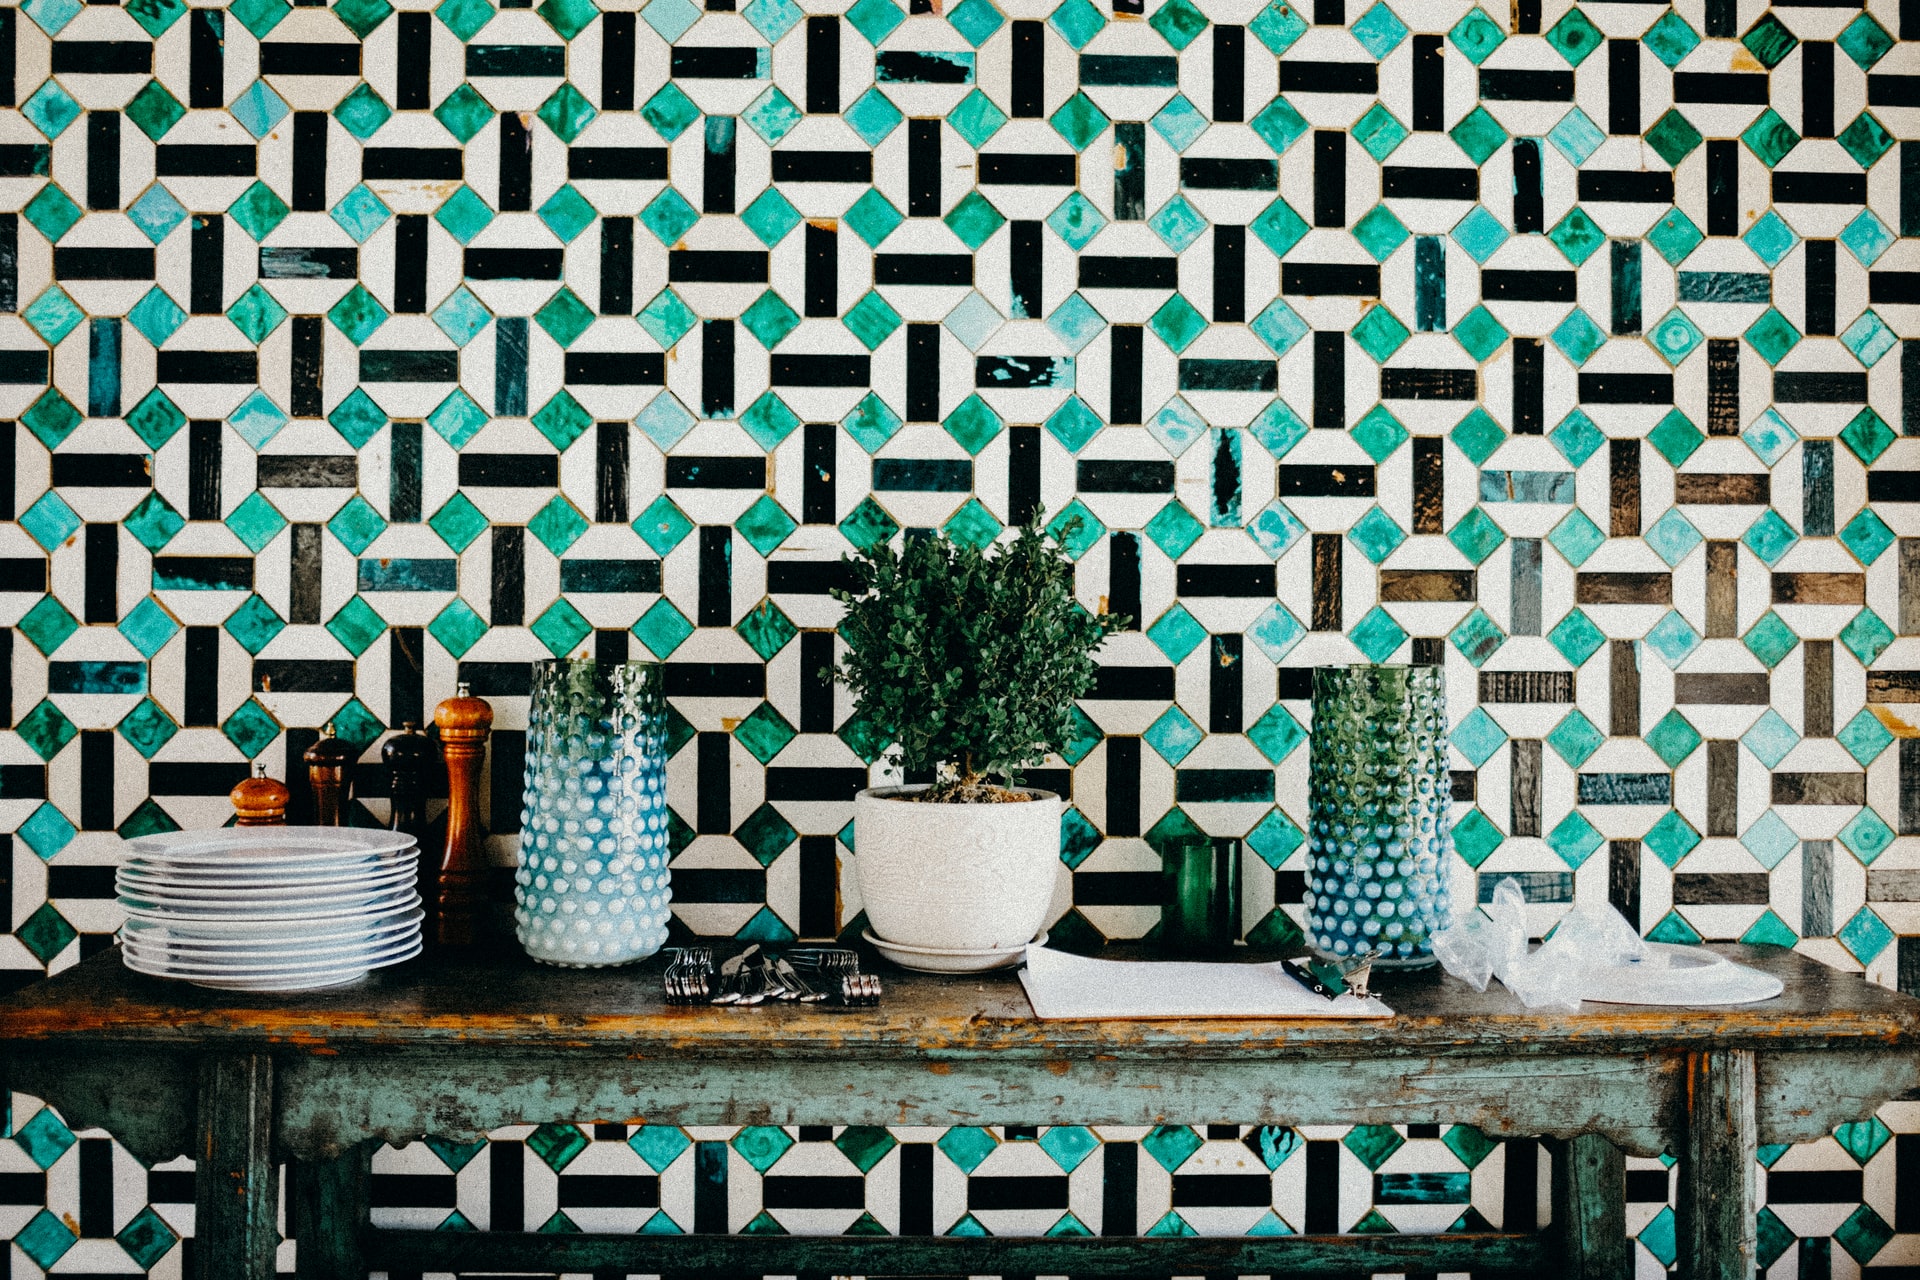 Geometric patterns with mood-boosting colors